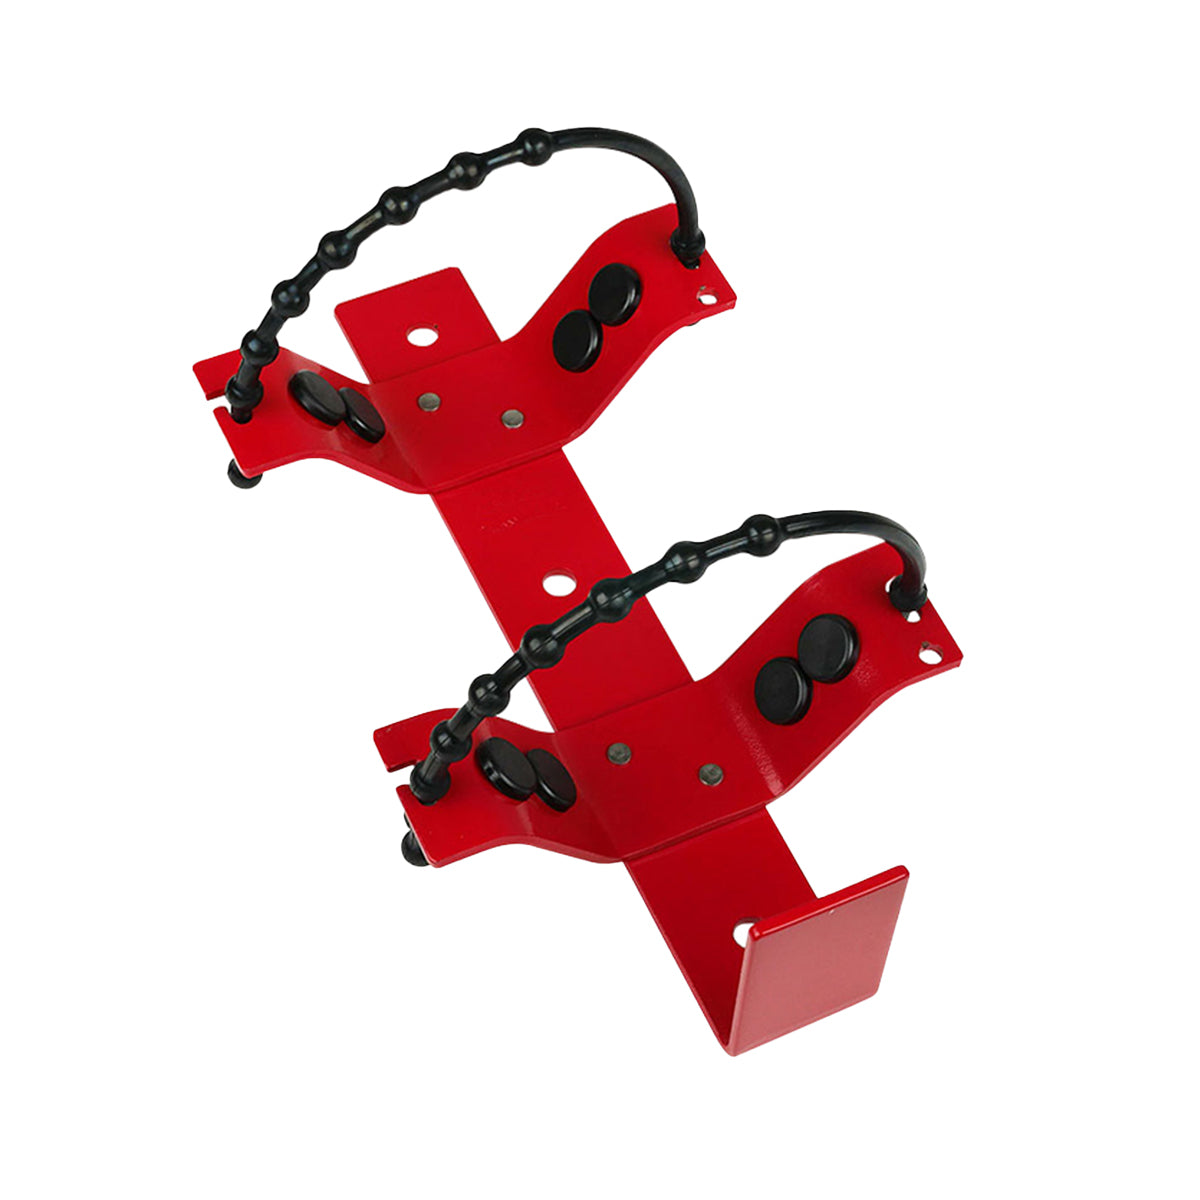 Metal rubber strap type vehicle bracket suits 9kg, powder coated red - Premium Heavy Duty Vehicle Brackets from Firebox - Shop now at Firebox Australia